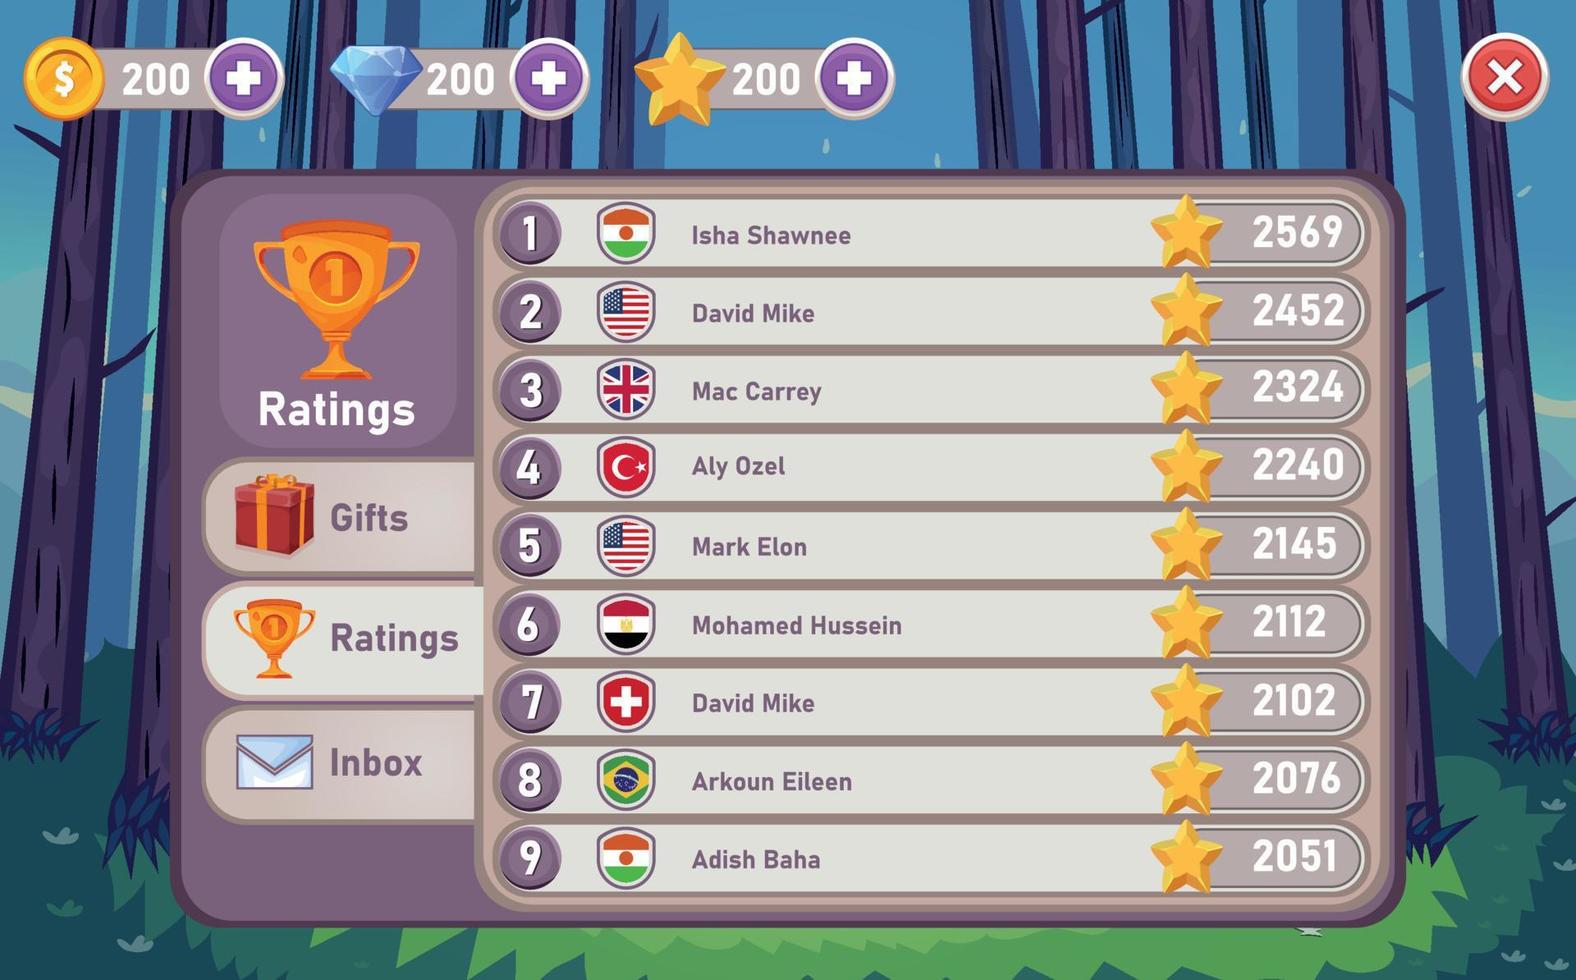 Rating list in the mobile game , user interface ui - ux vector